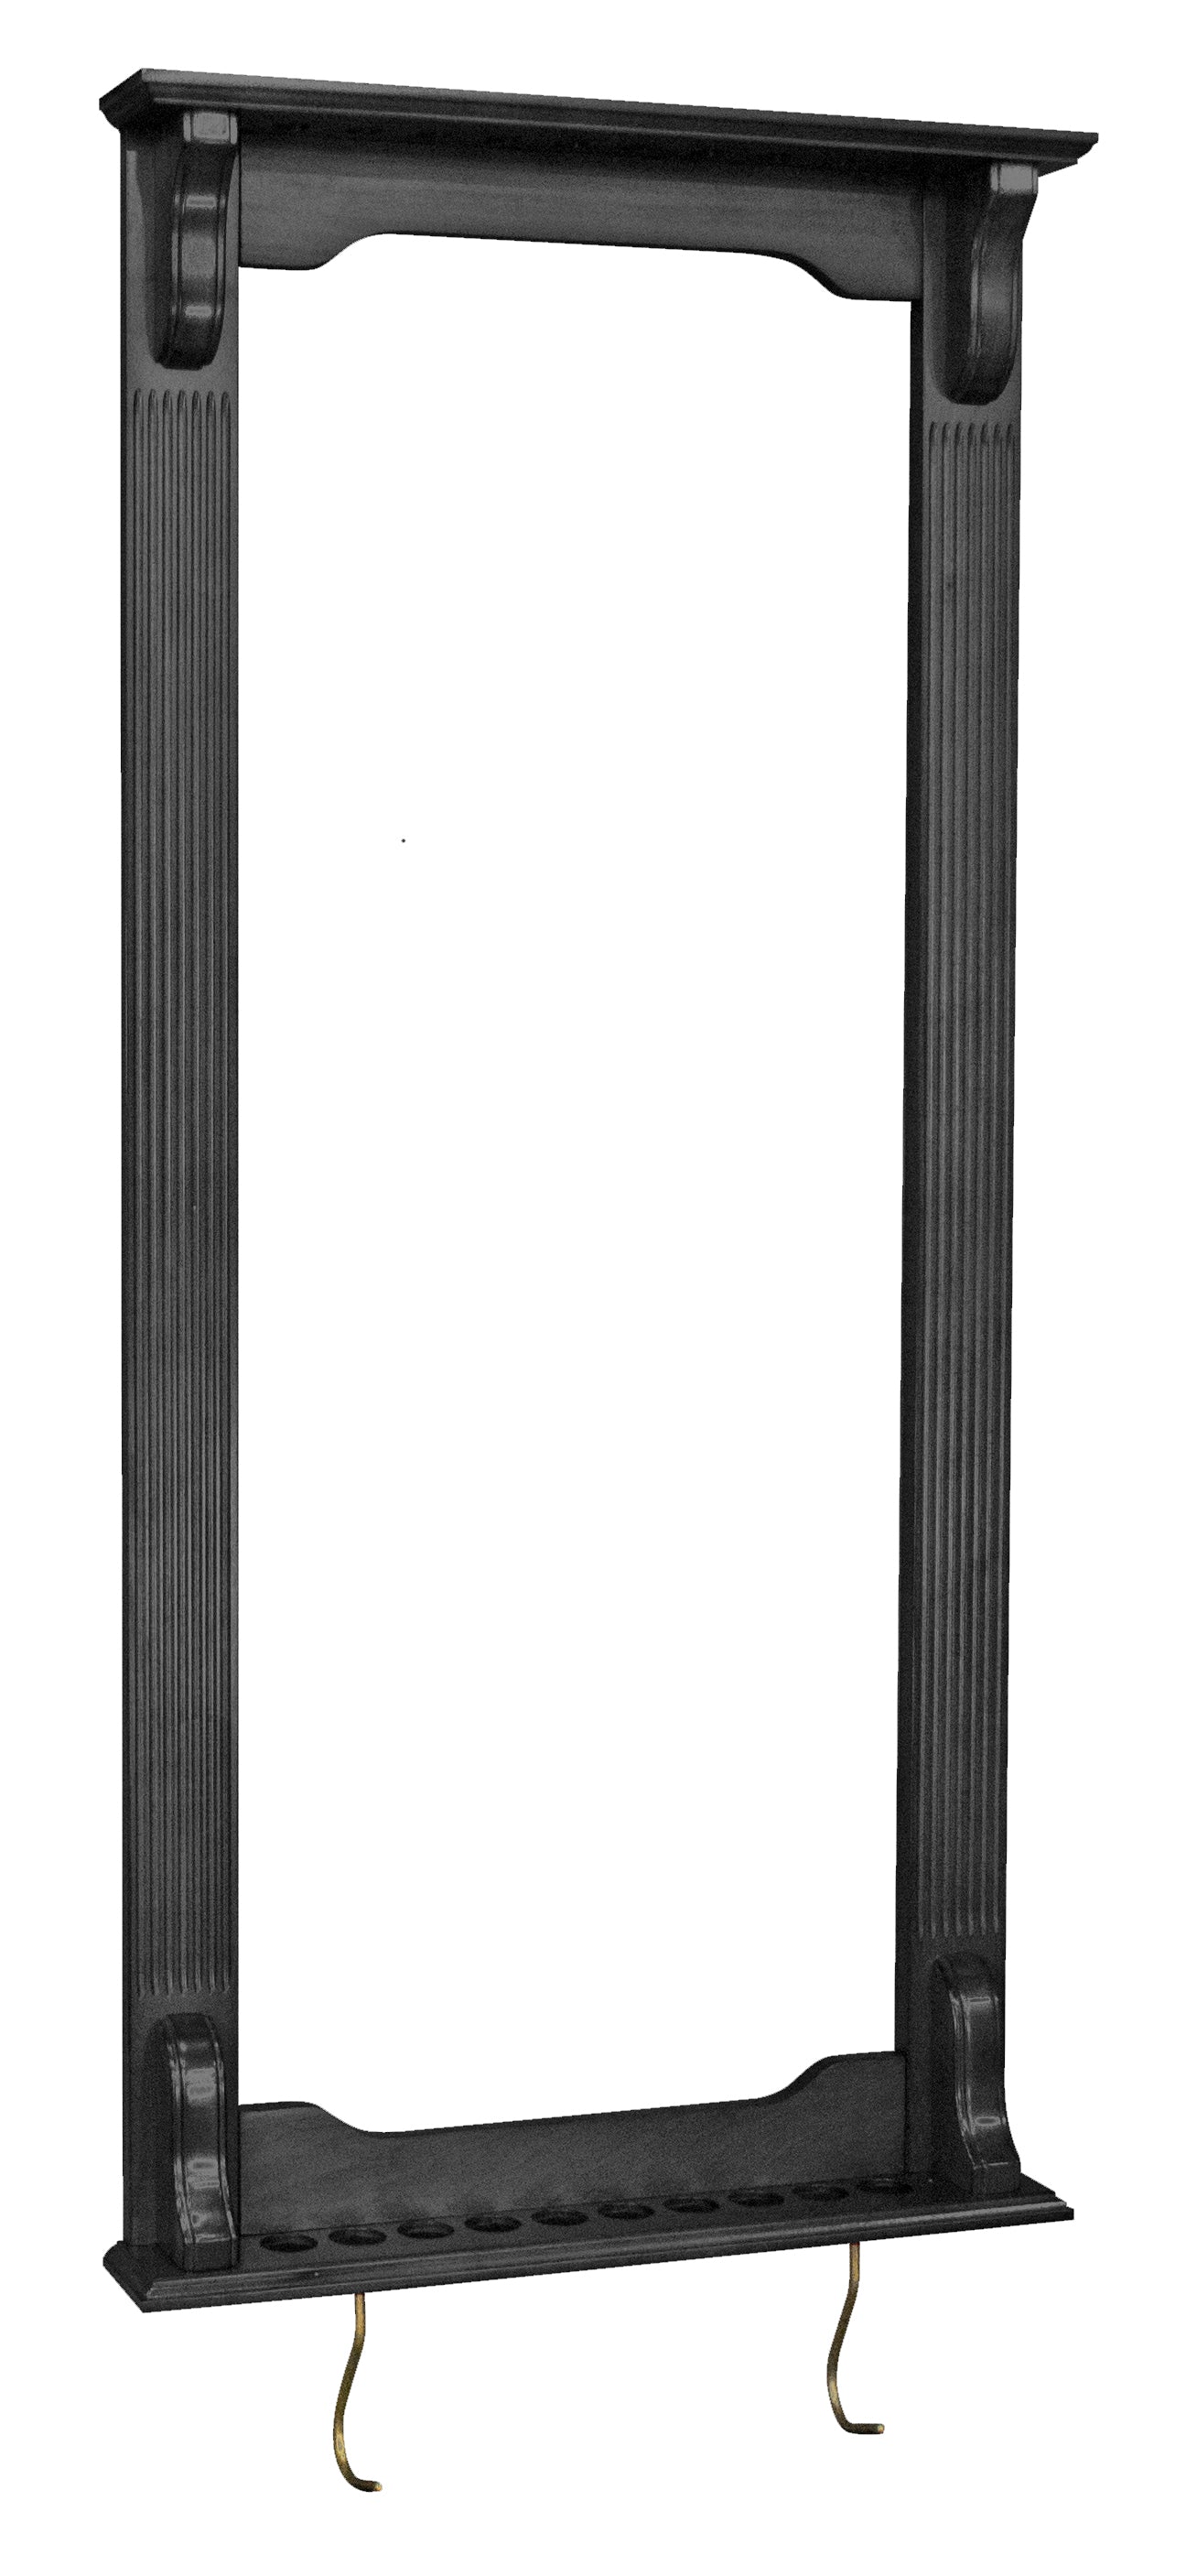 Legacy Billiards Heritage Wall Cue Rack in Graphite Finish